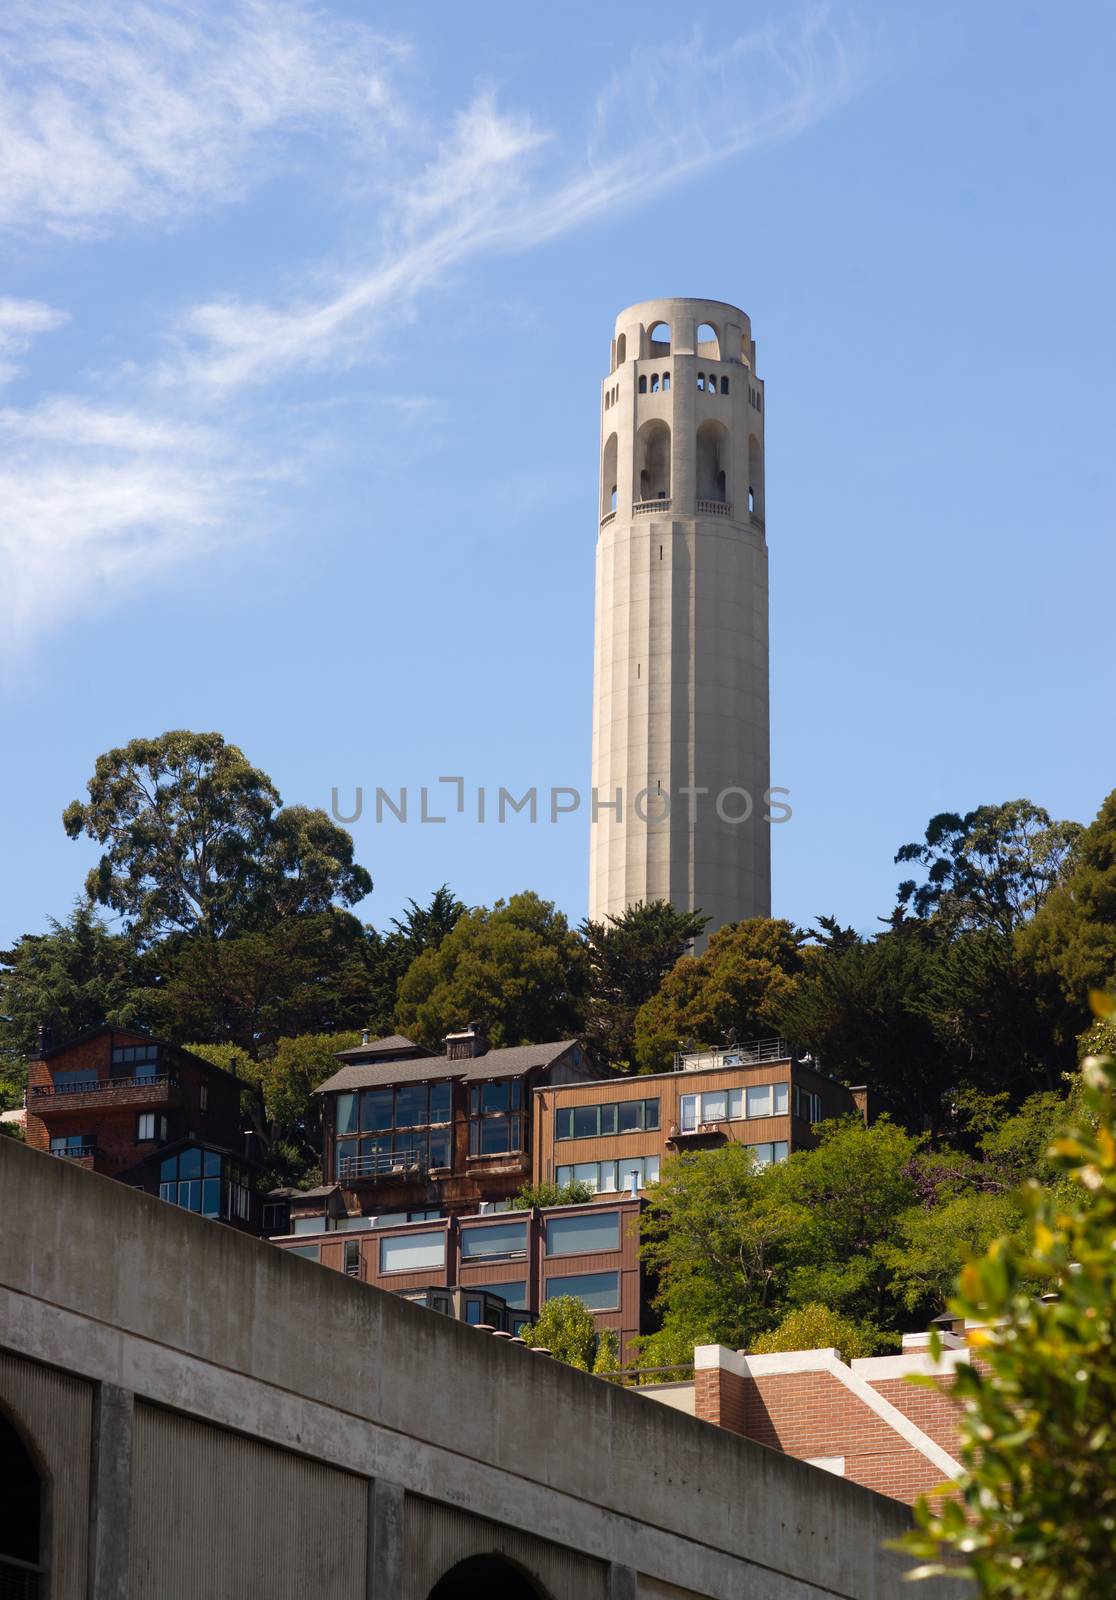 Coit tower provides a great vantage point to view San Francisco